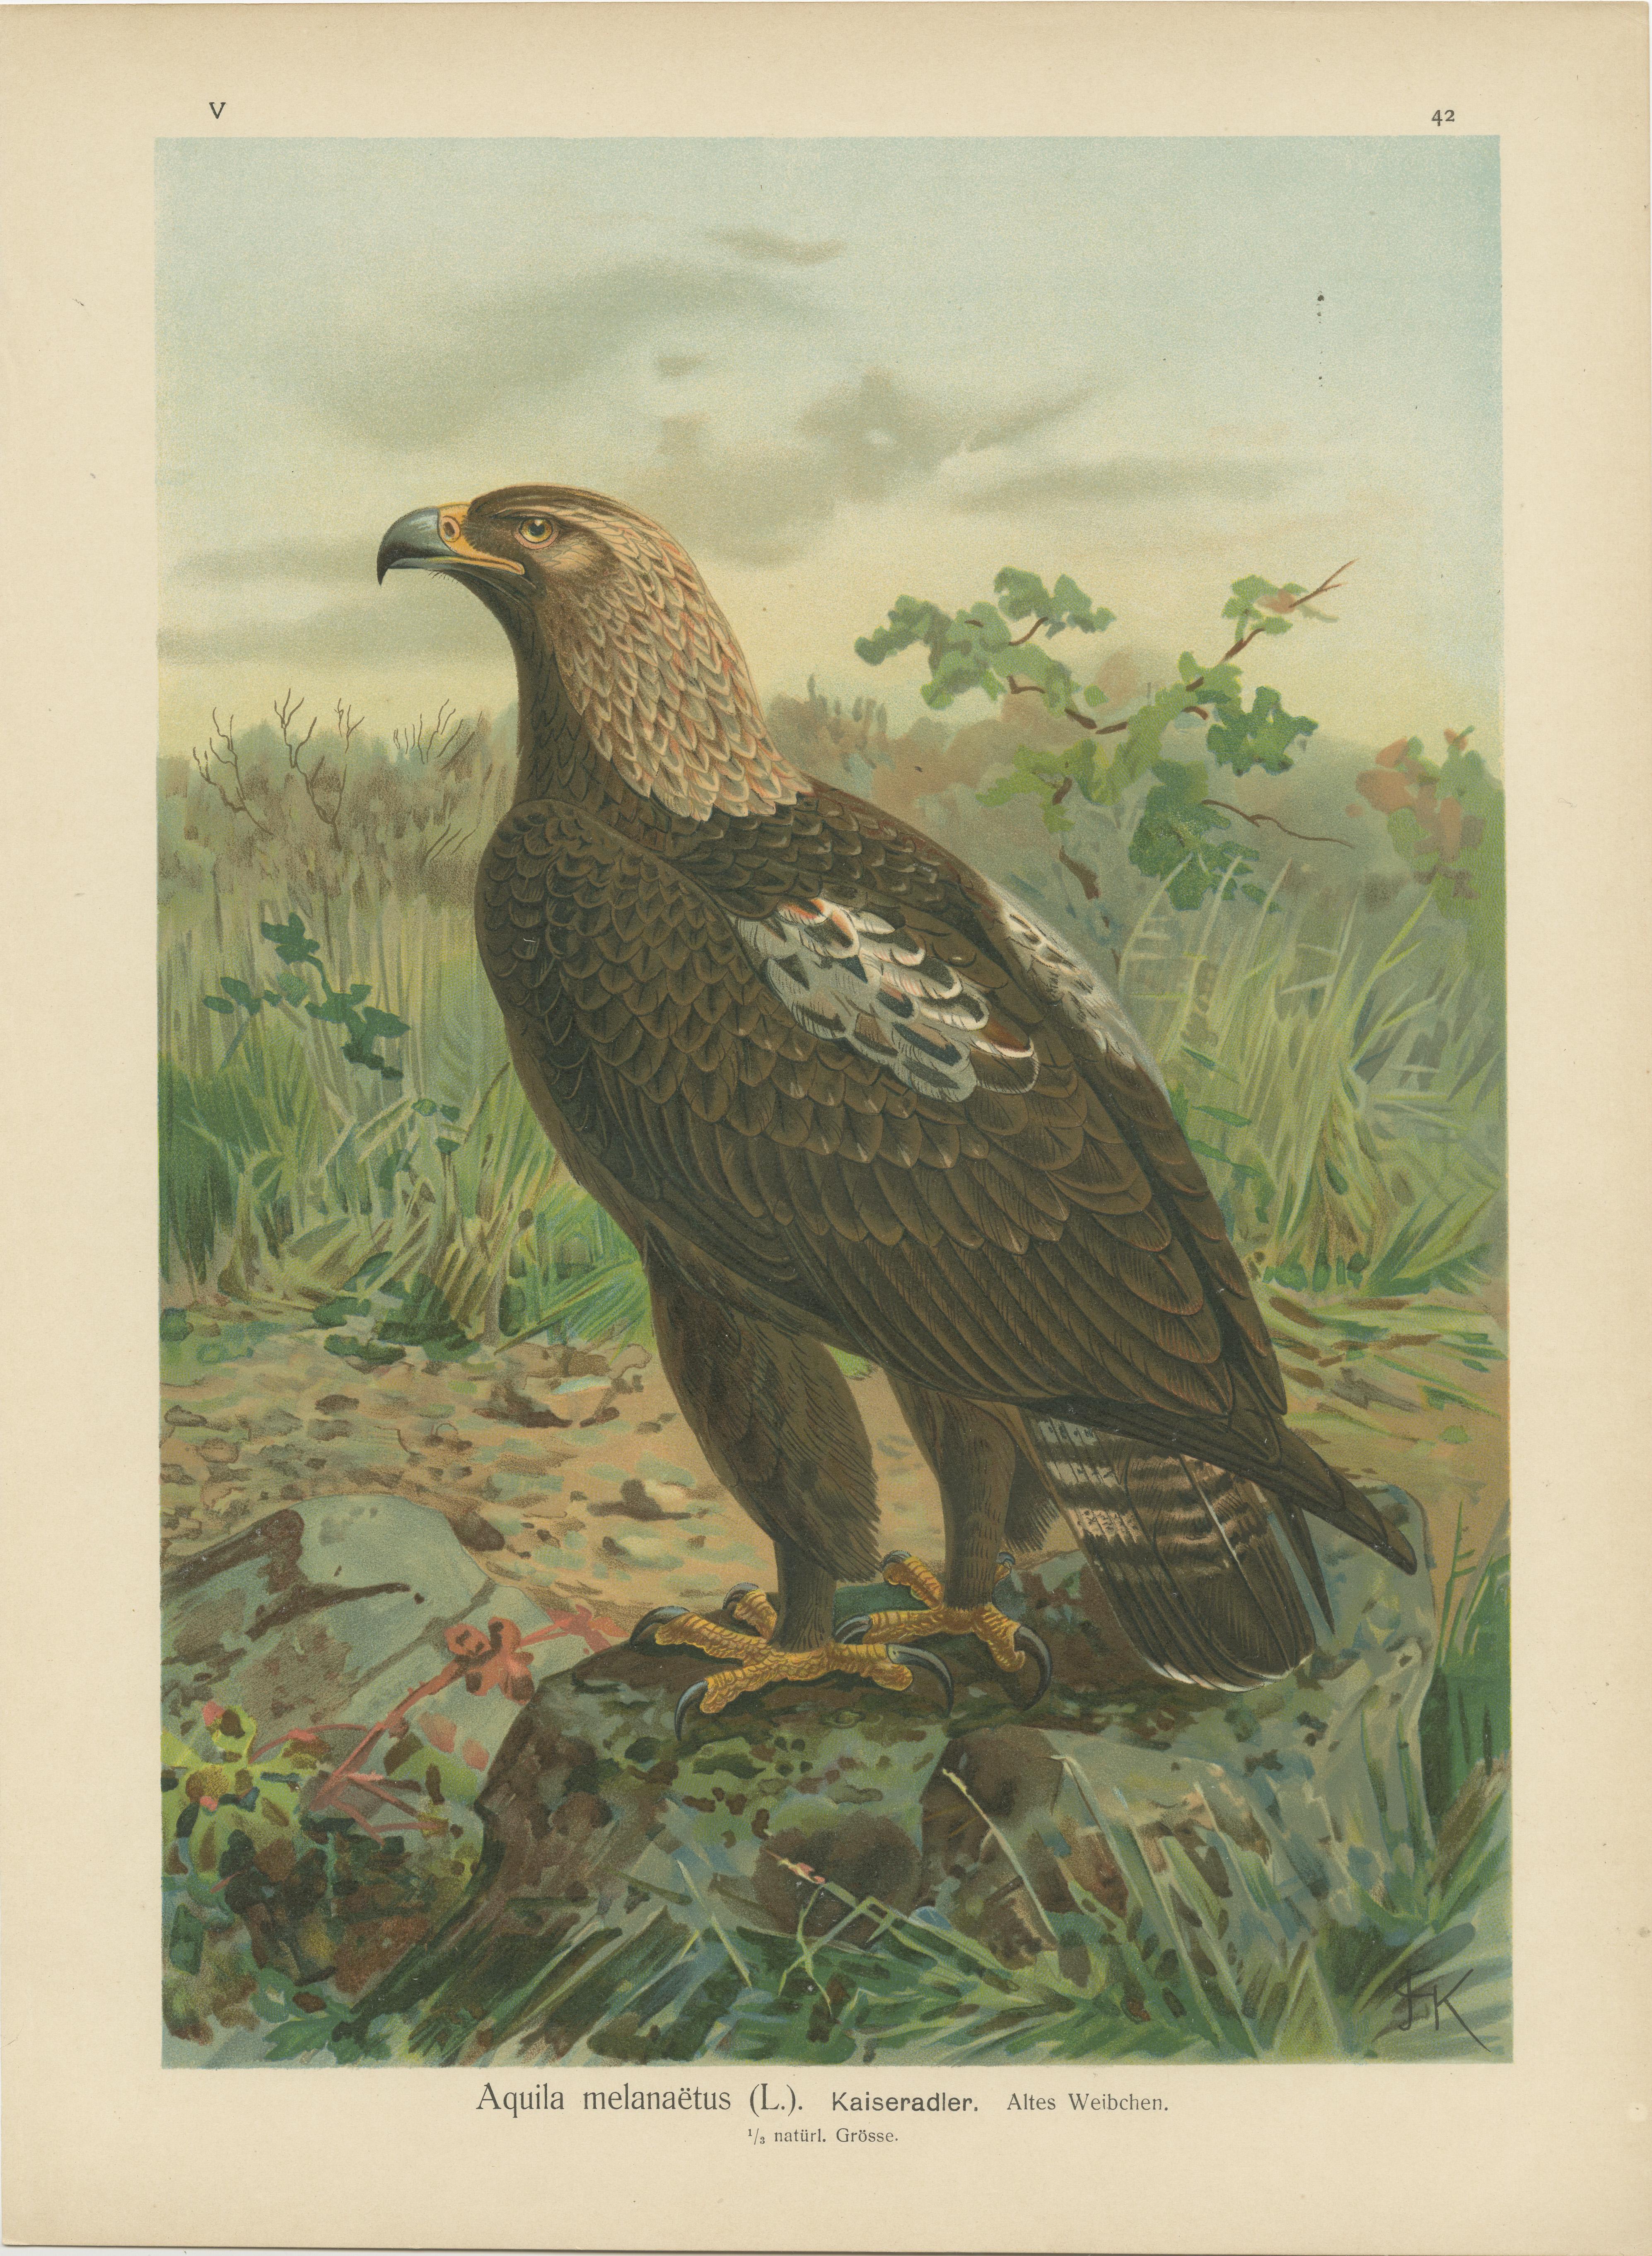 The chromolithographs presented are exquisite examples of early 20th-century natural history illustration, specifically from the year 1901, attributed to the renowned ornithologist Johann Friedrich Naumann. These prints showcase two distinct species